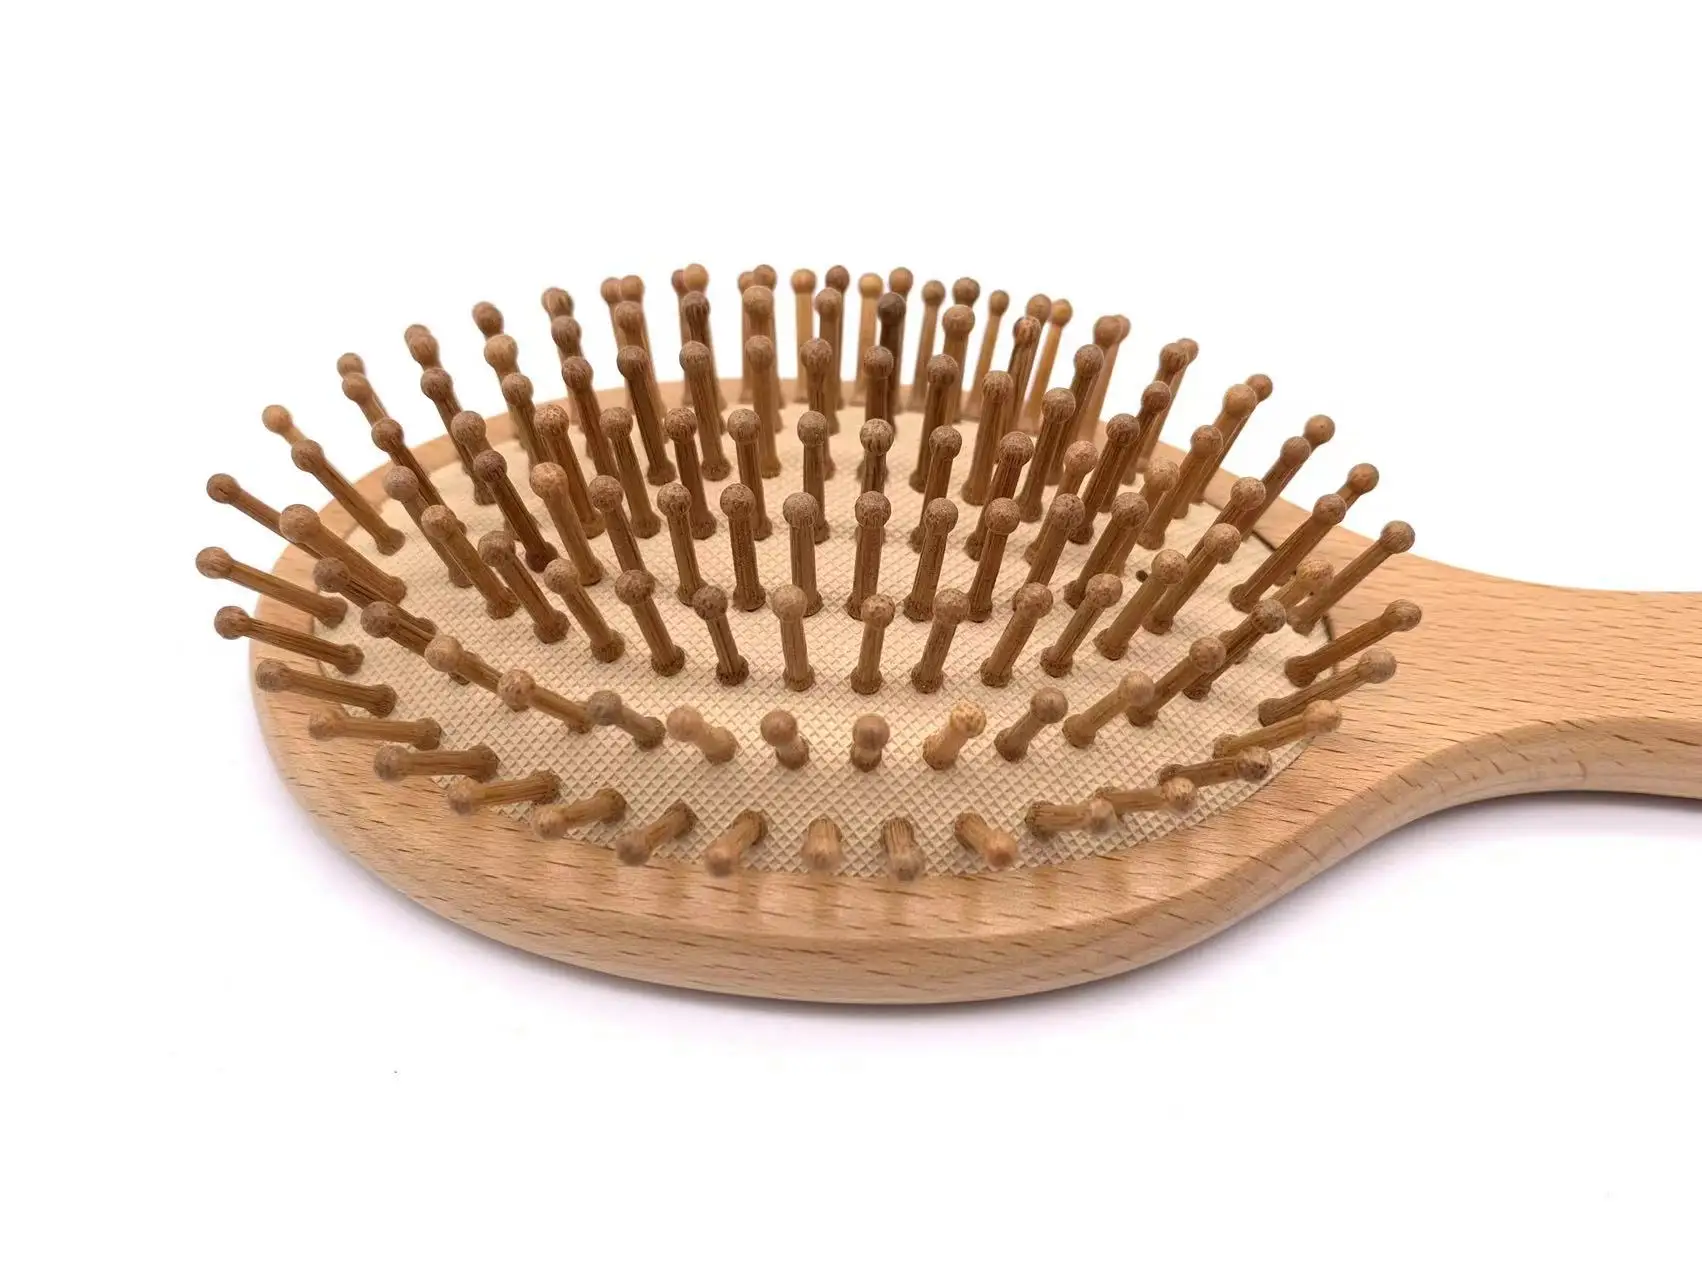 Ethink Private Label Wooden and Bamboo Hair Brush Natural Air Bag Comb Long Handle Scalp Massage Brush